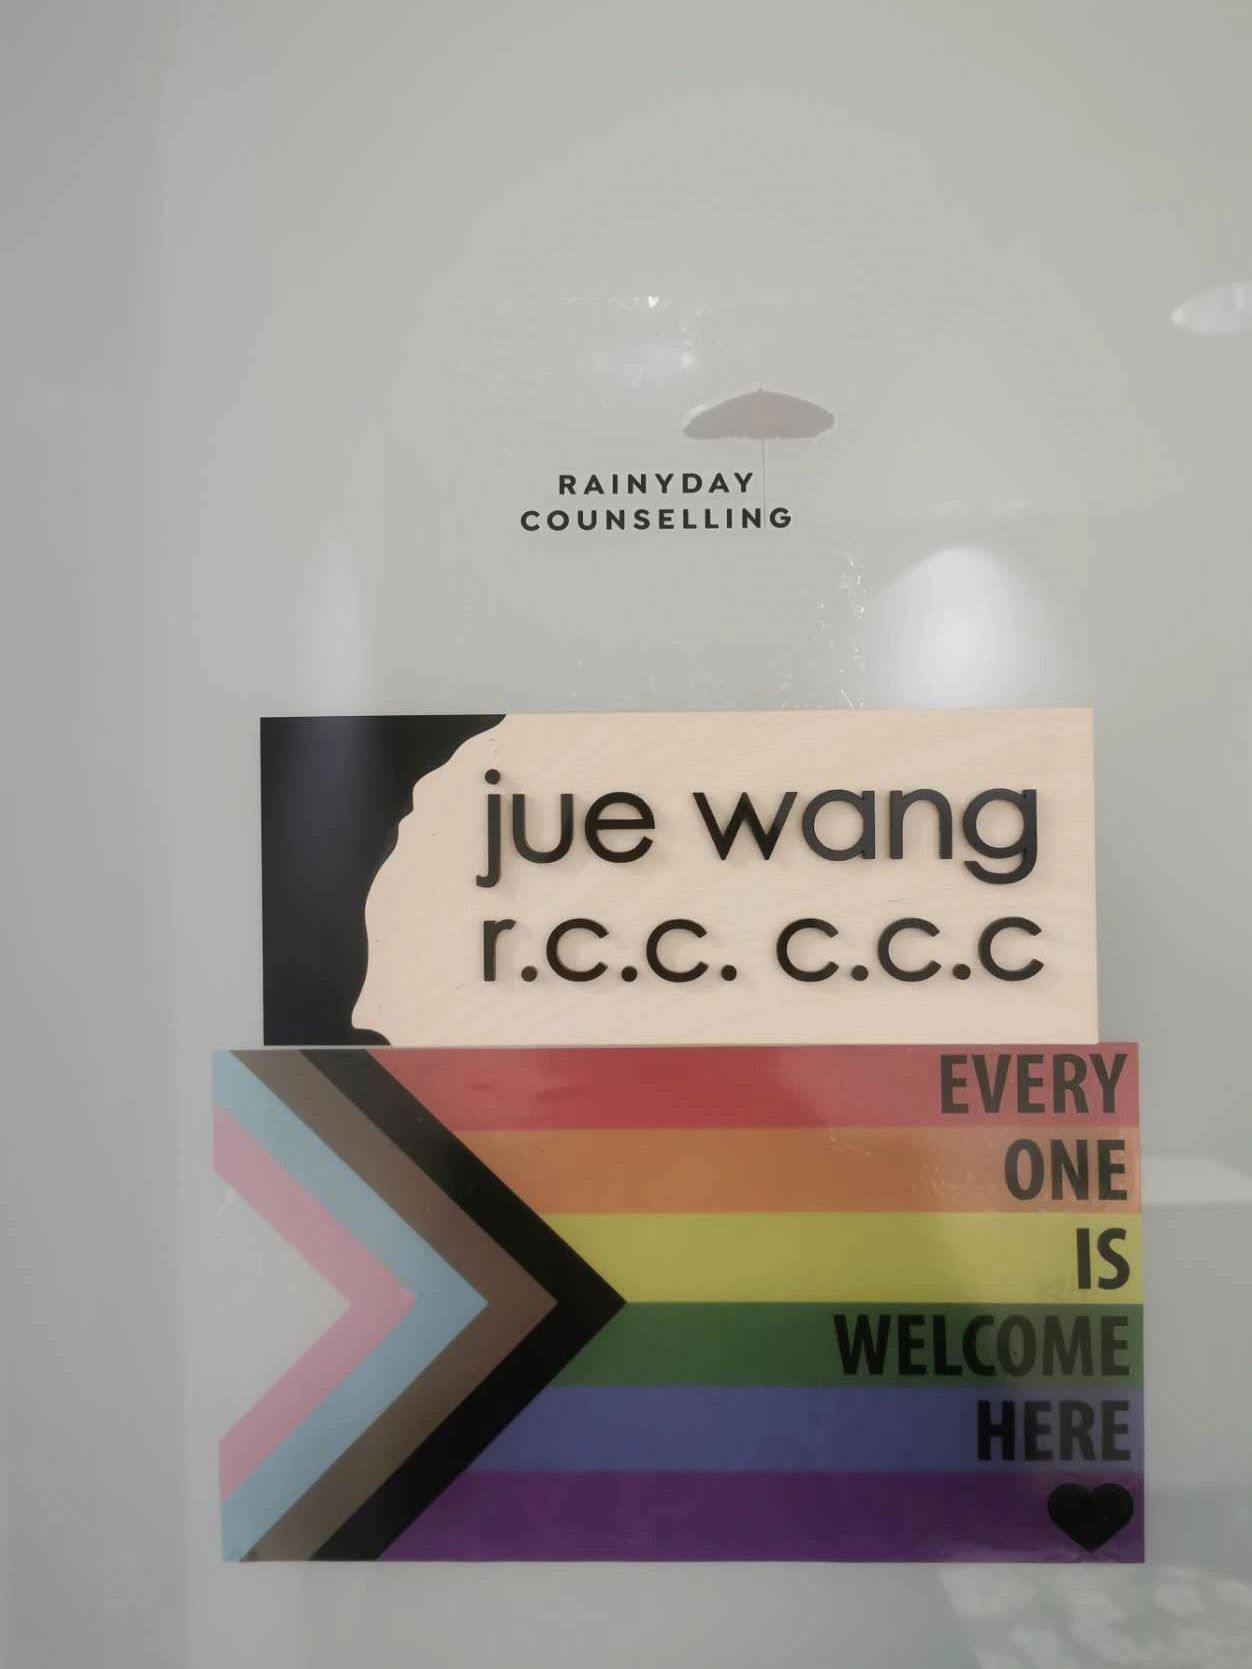 Office door Rainyday Counselling signage, jue wang r.c.c. c.c.c. and LGBTQ2+ rainbow flag sticker